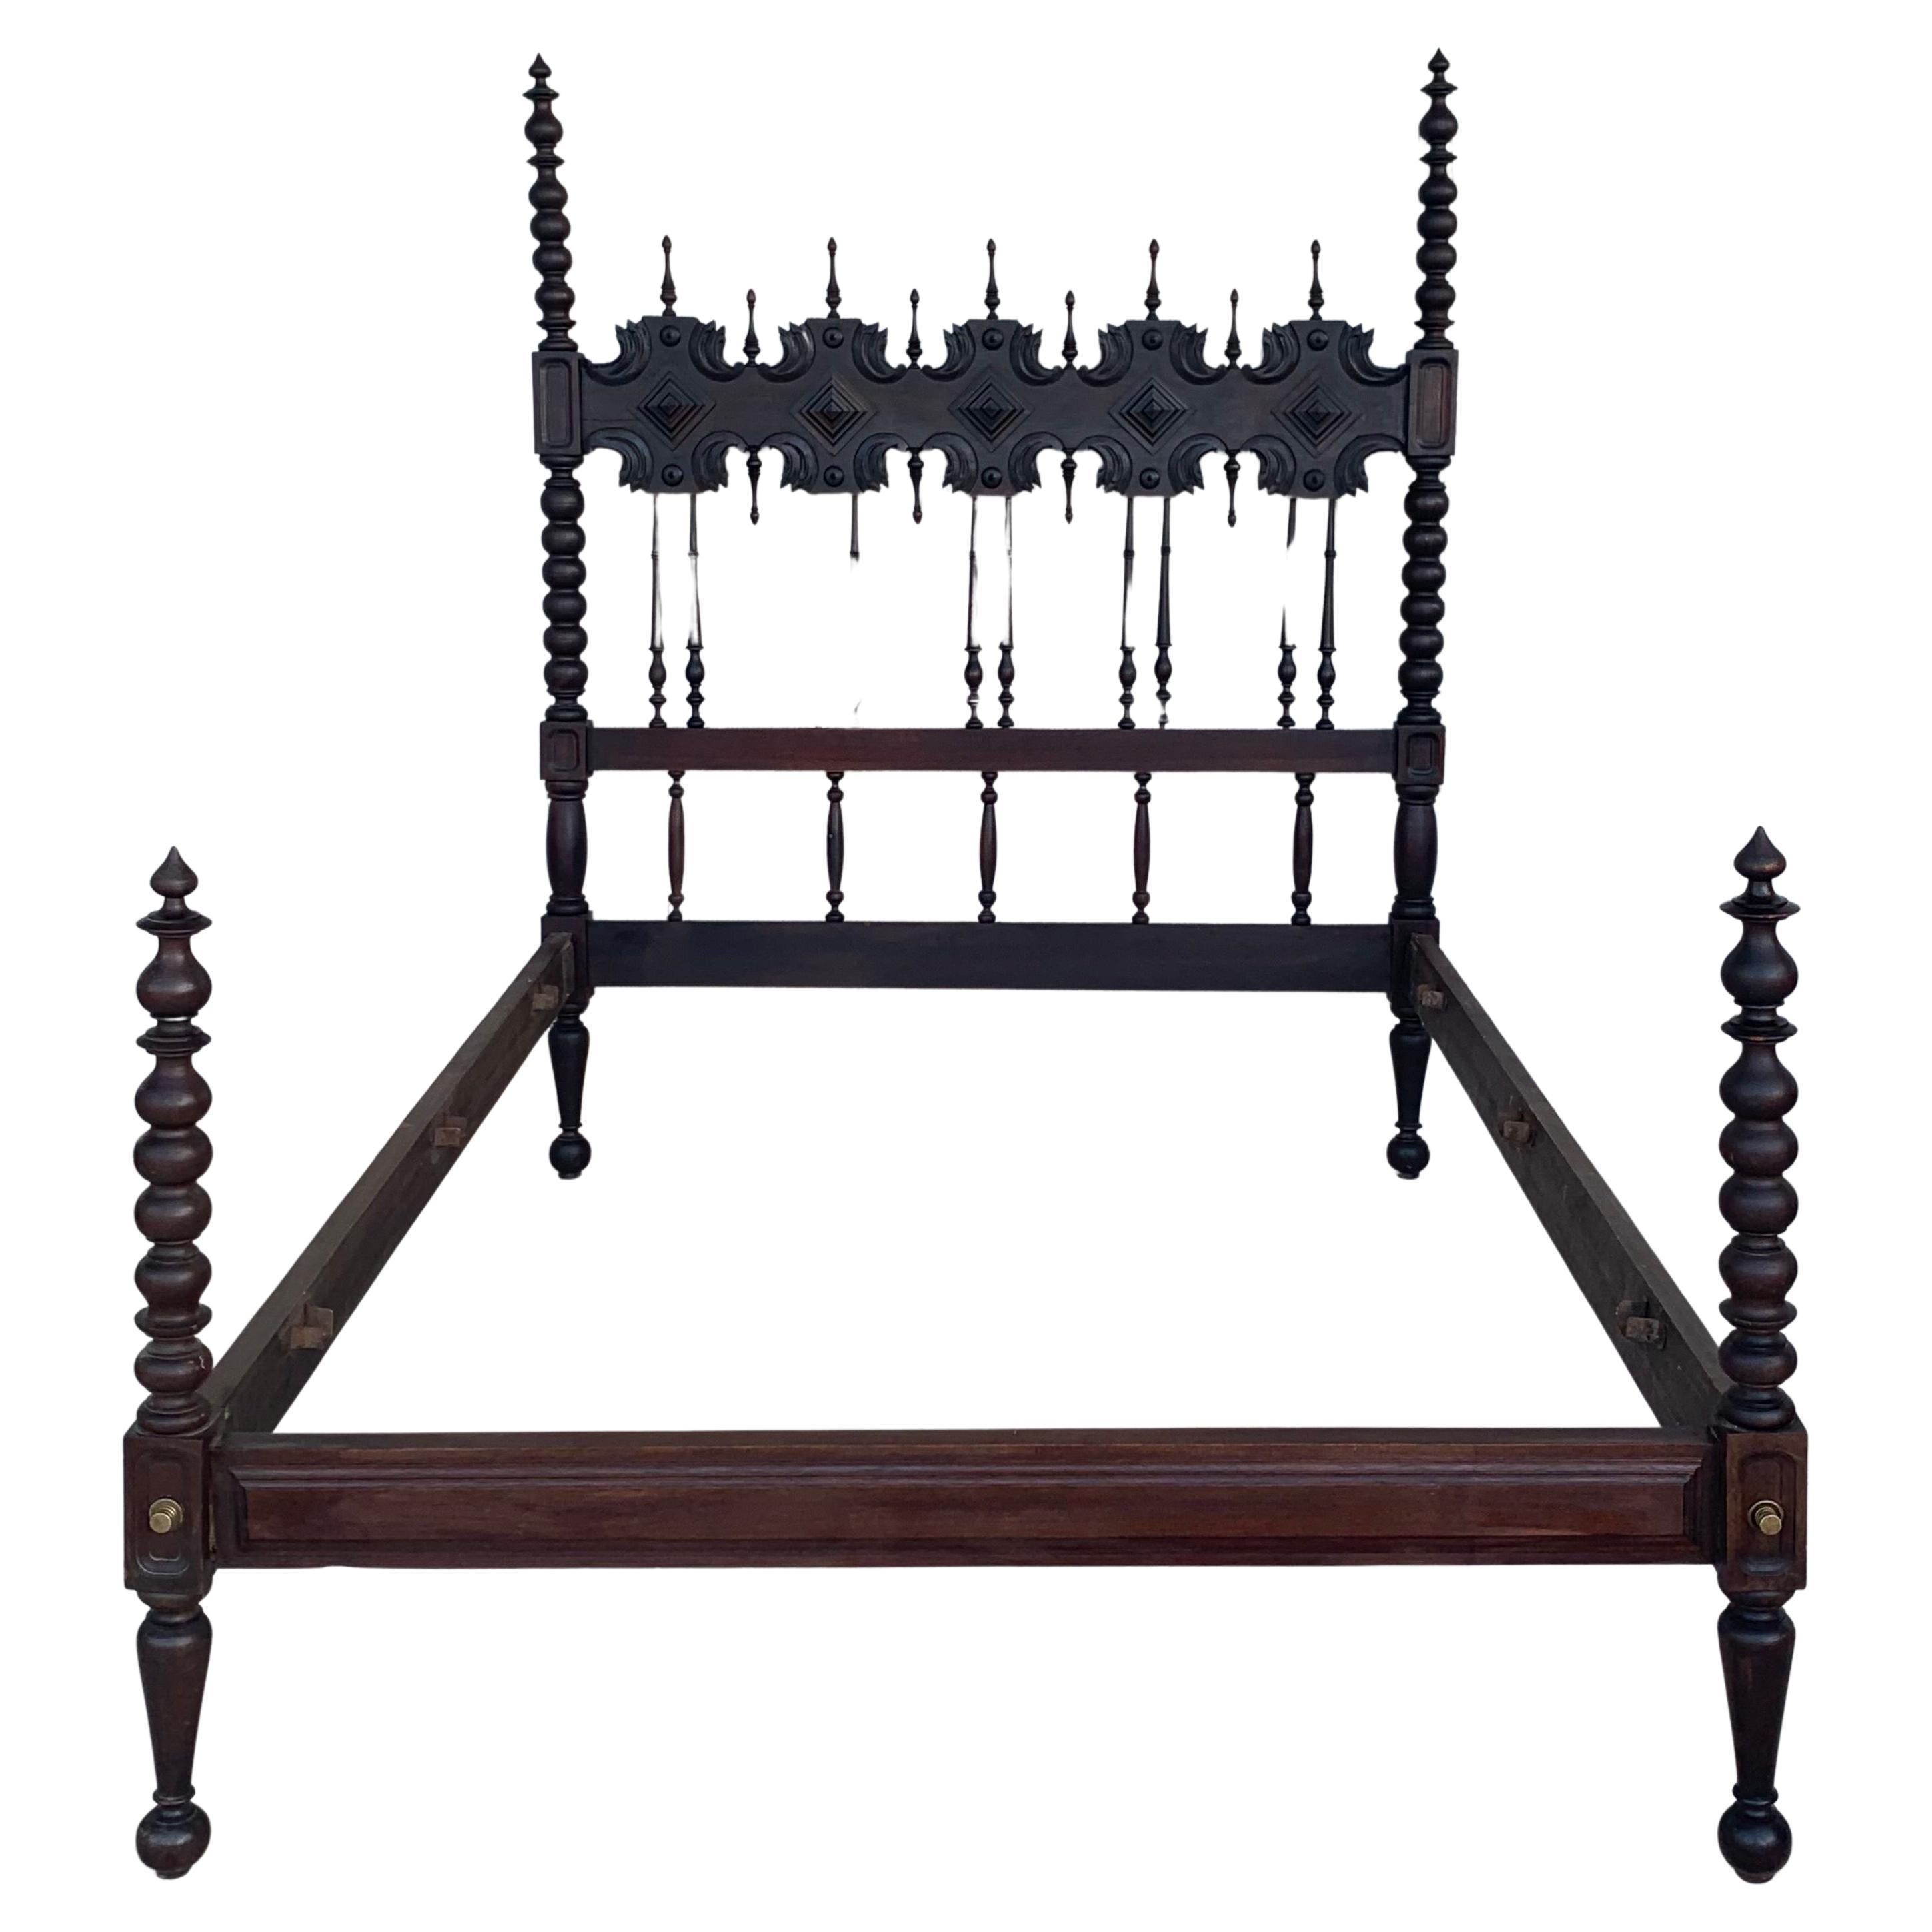 19th century Baroque bed, original Lisbon bed


This Queen size 4-poster bed is hand carved with elaborate details, spiral turned post, 3D open spiral twist spindles, and Moorish details represented by the repetition of arches. It is carved and